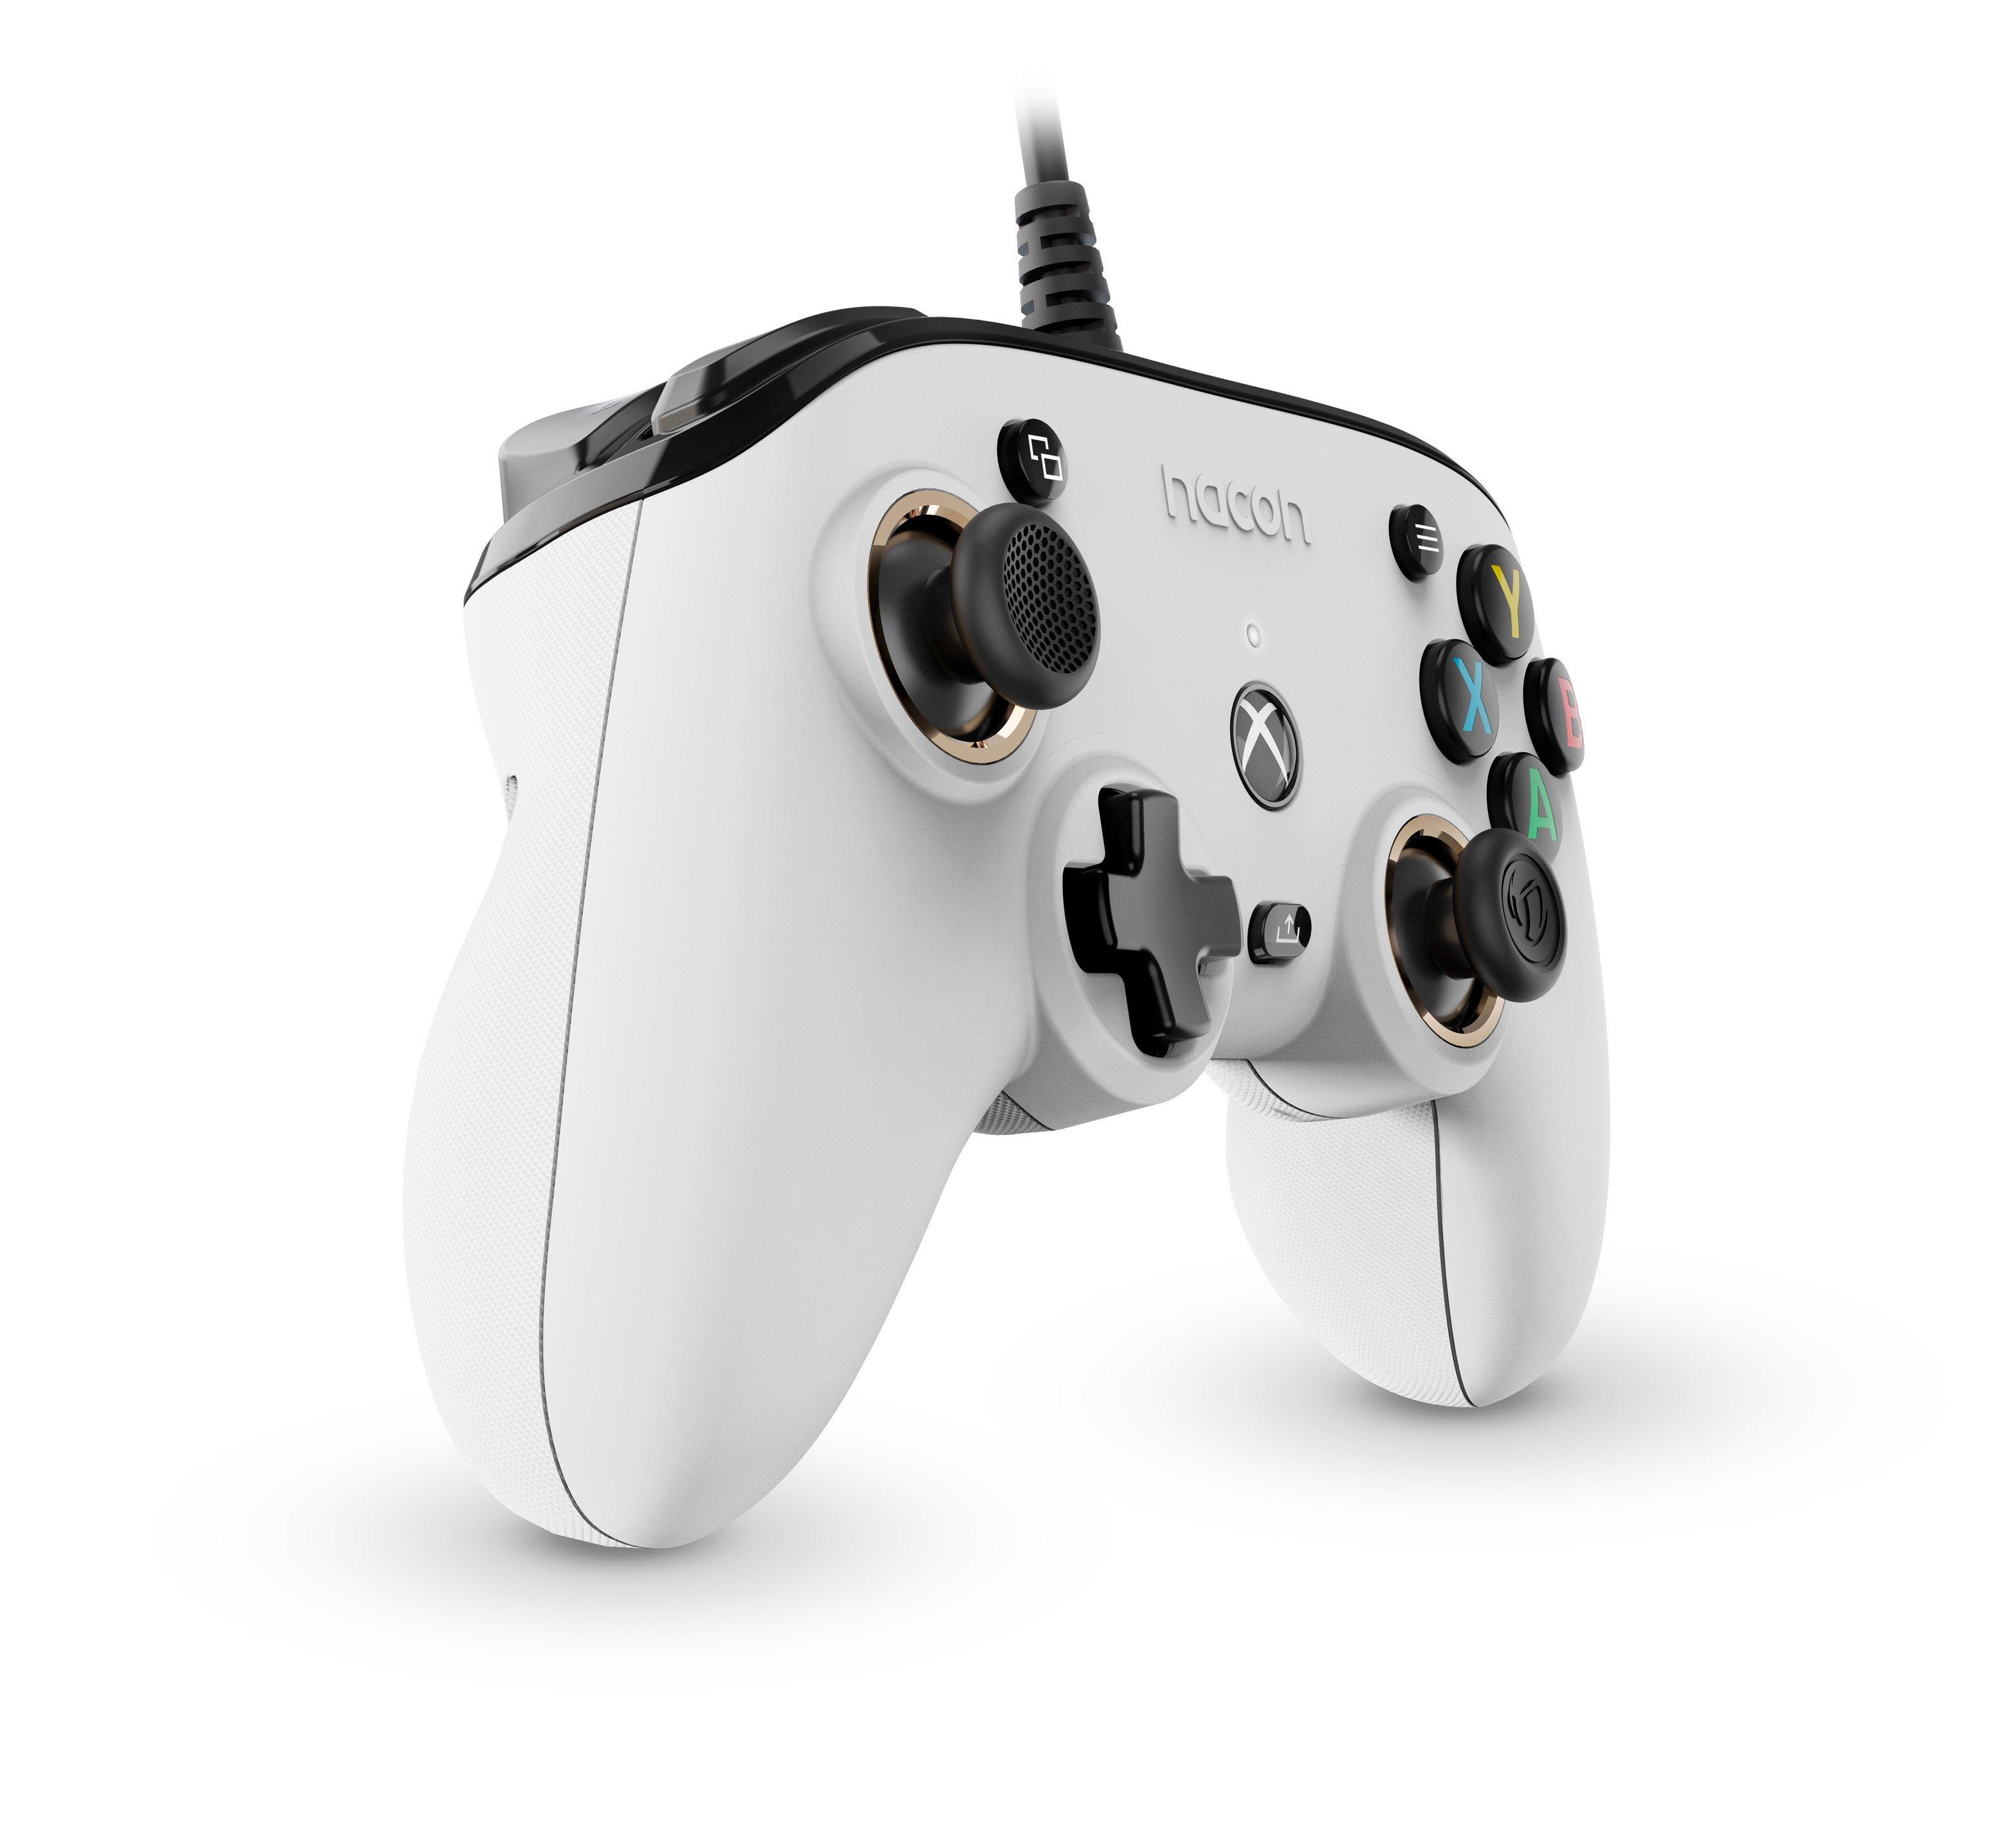 RIG Pro Compact Wired Controller for Xbox Series X